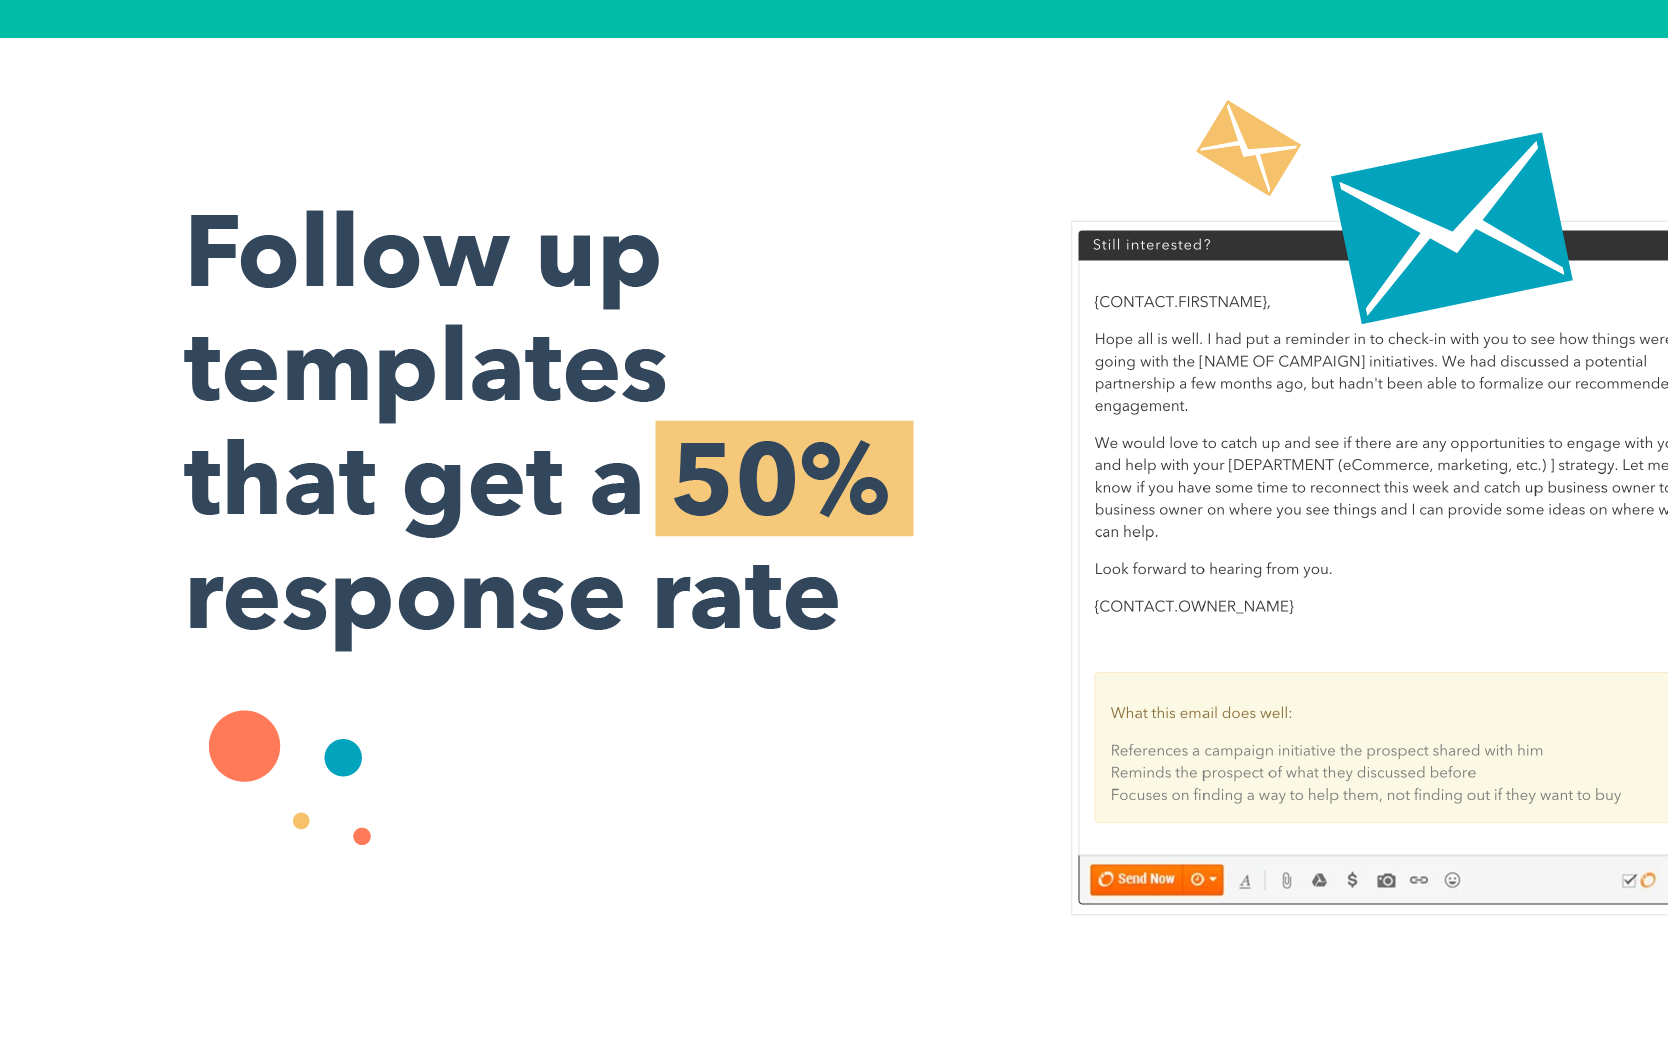 Follow up templates that get a 50% response rate